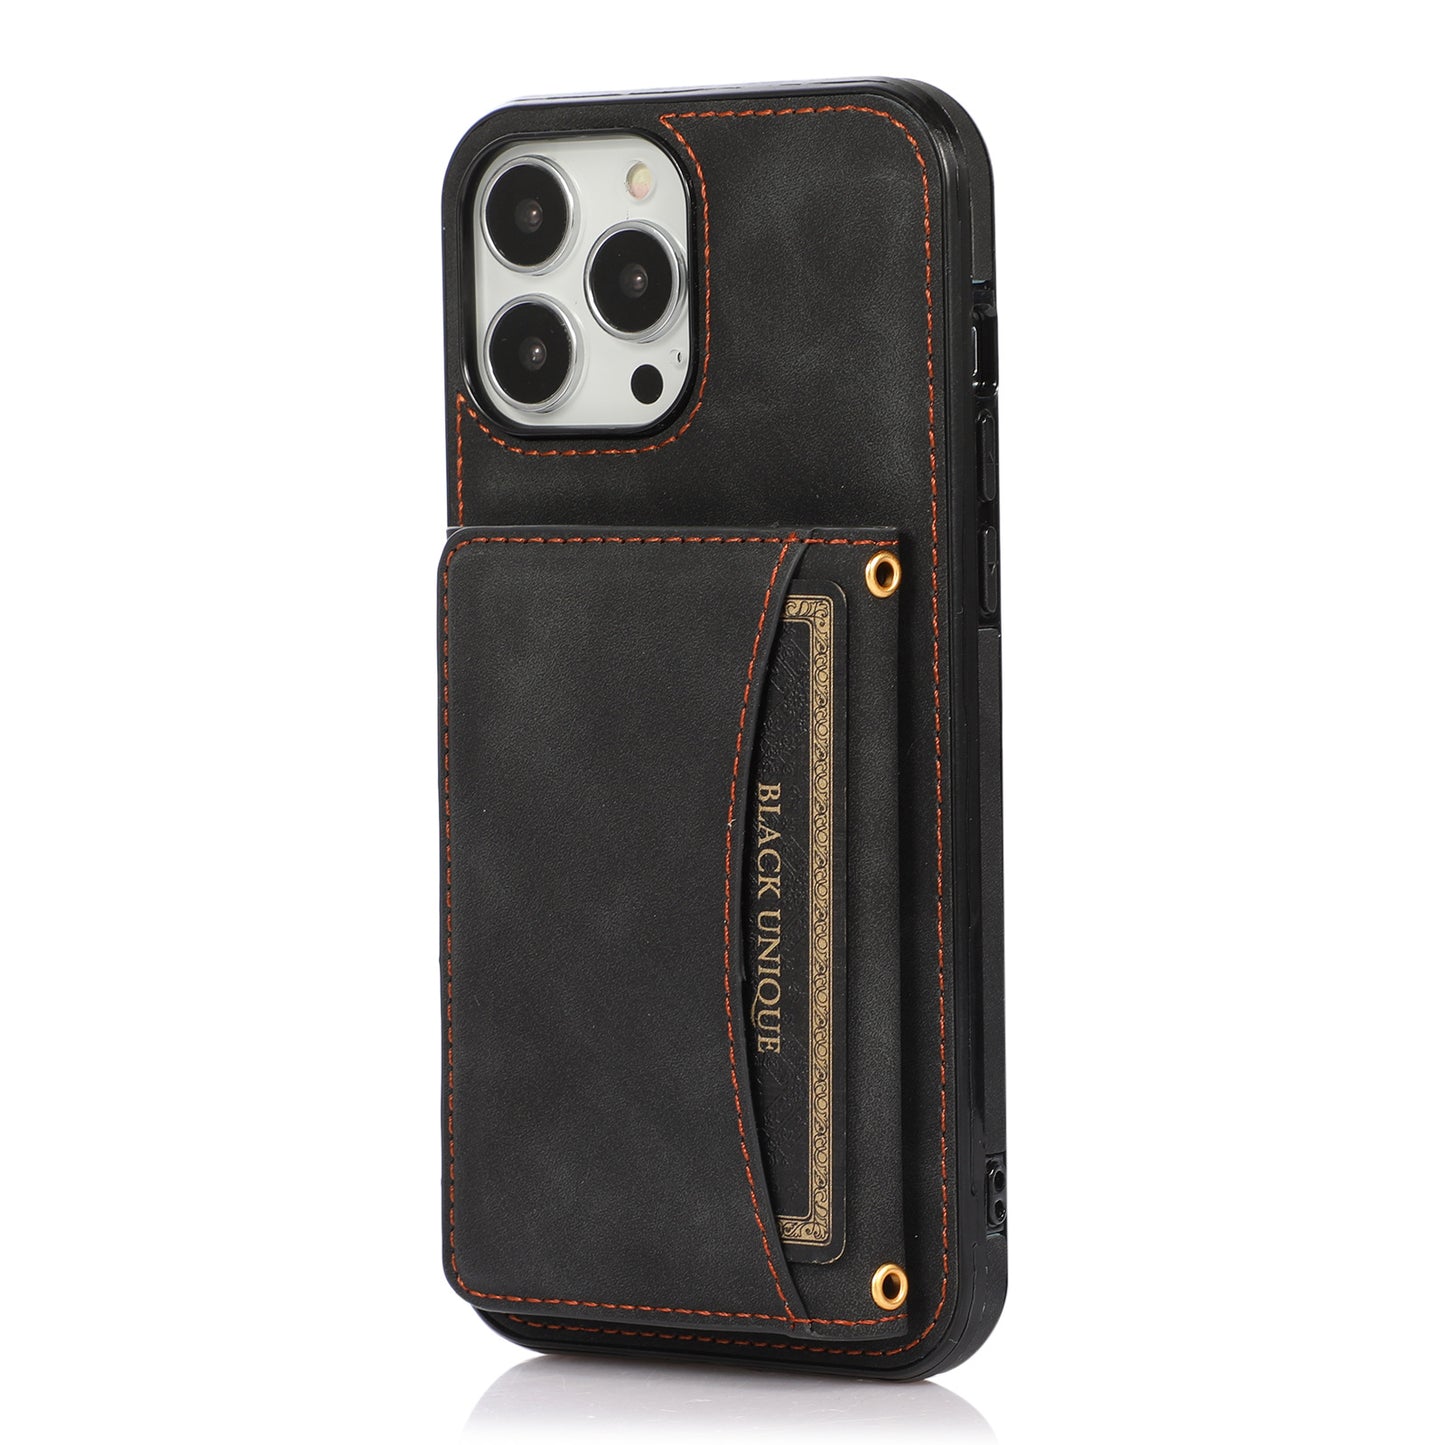 Leather Card Protection Sleeve Phone Case.